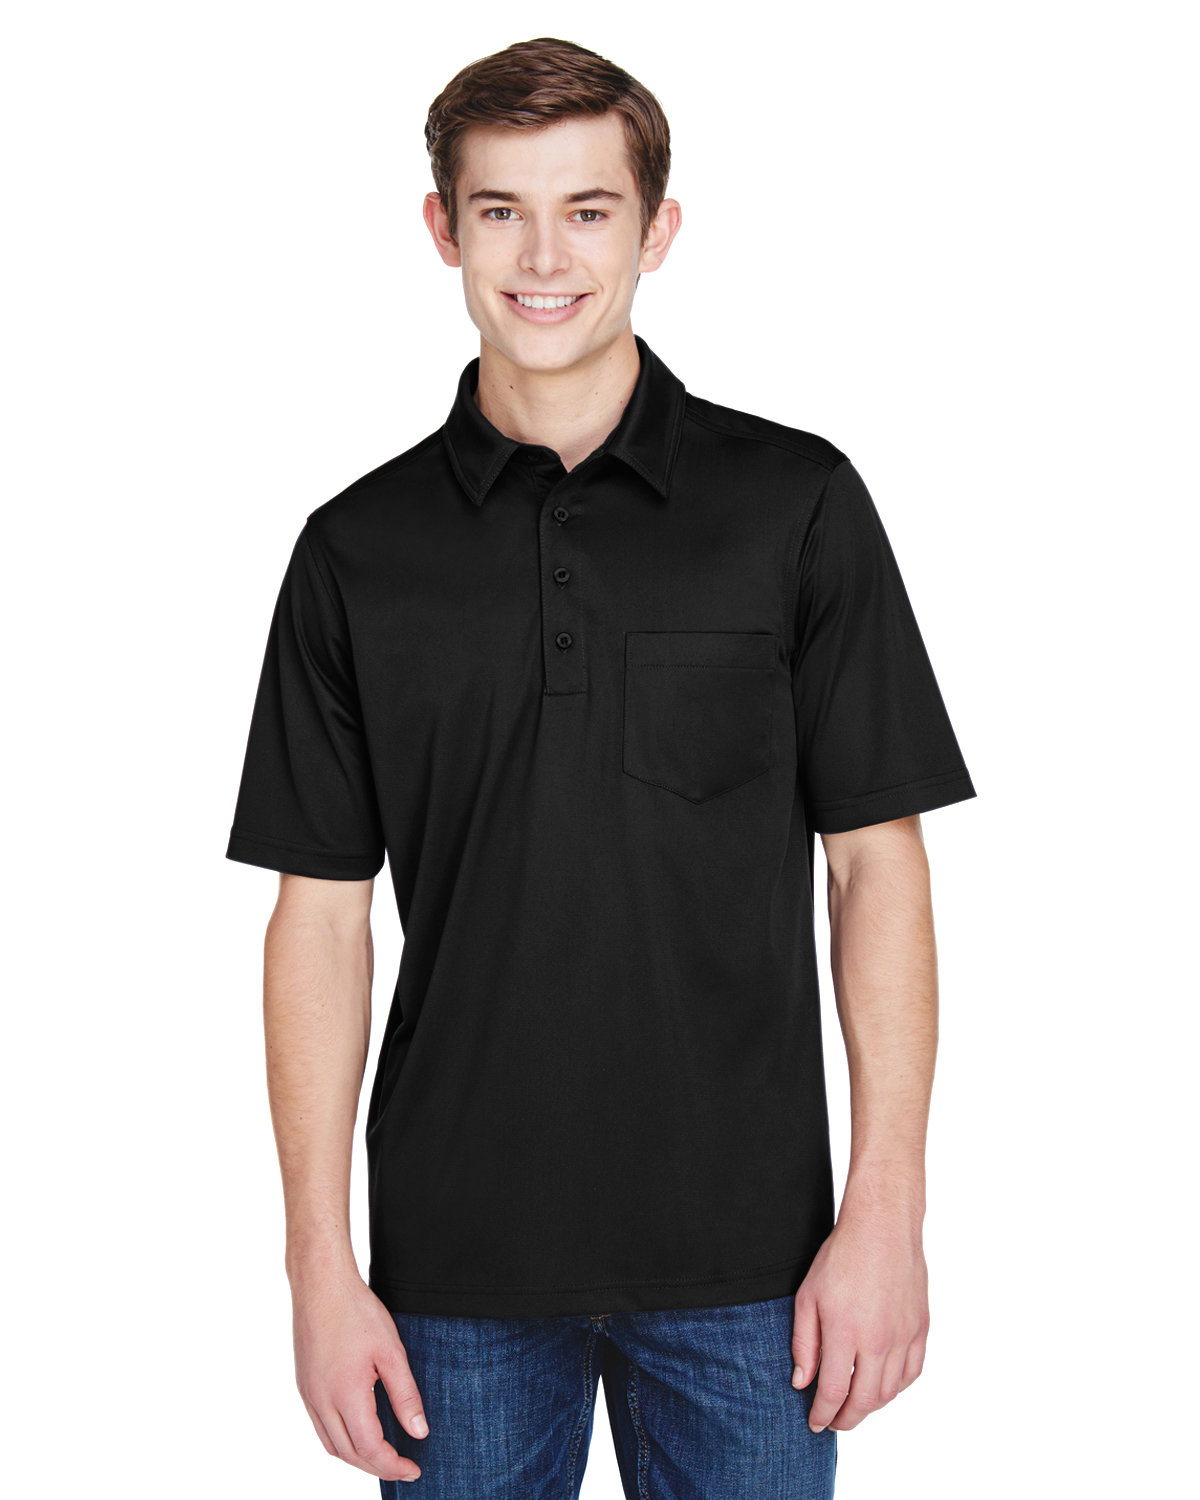 Extreme Men's Tall Eperformance™ Shift Snag Protection Plus Polo BLACK 